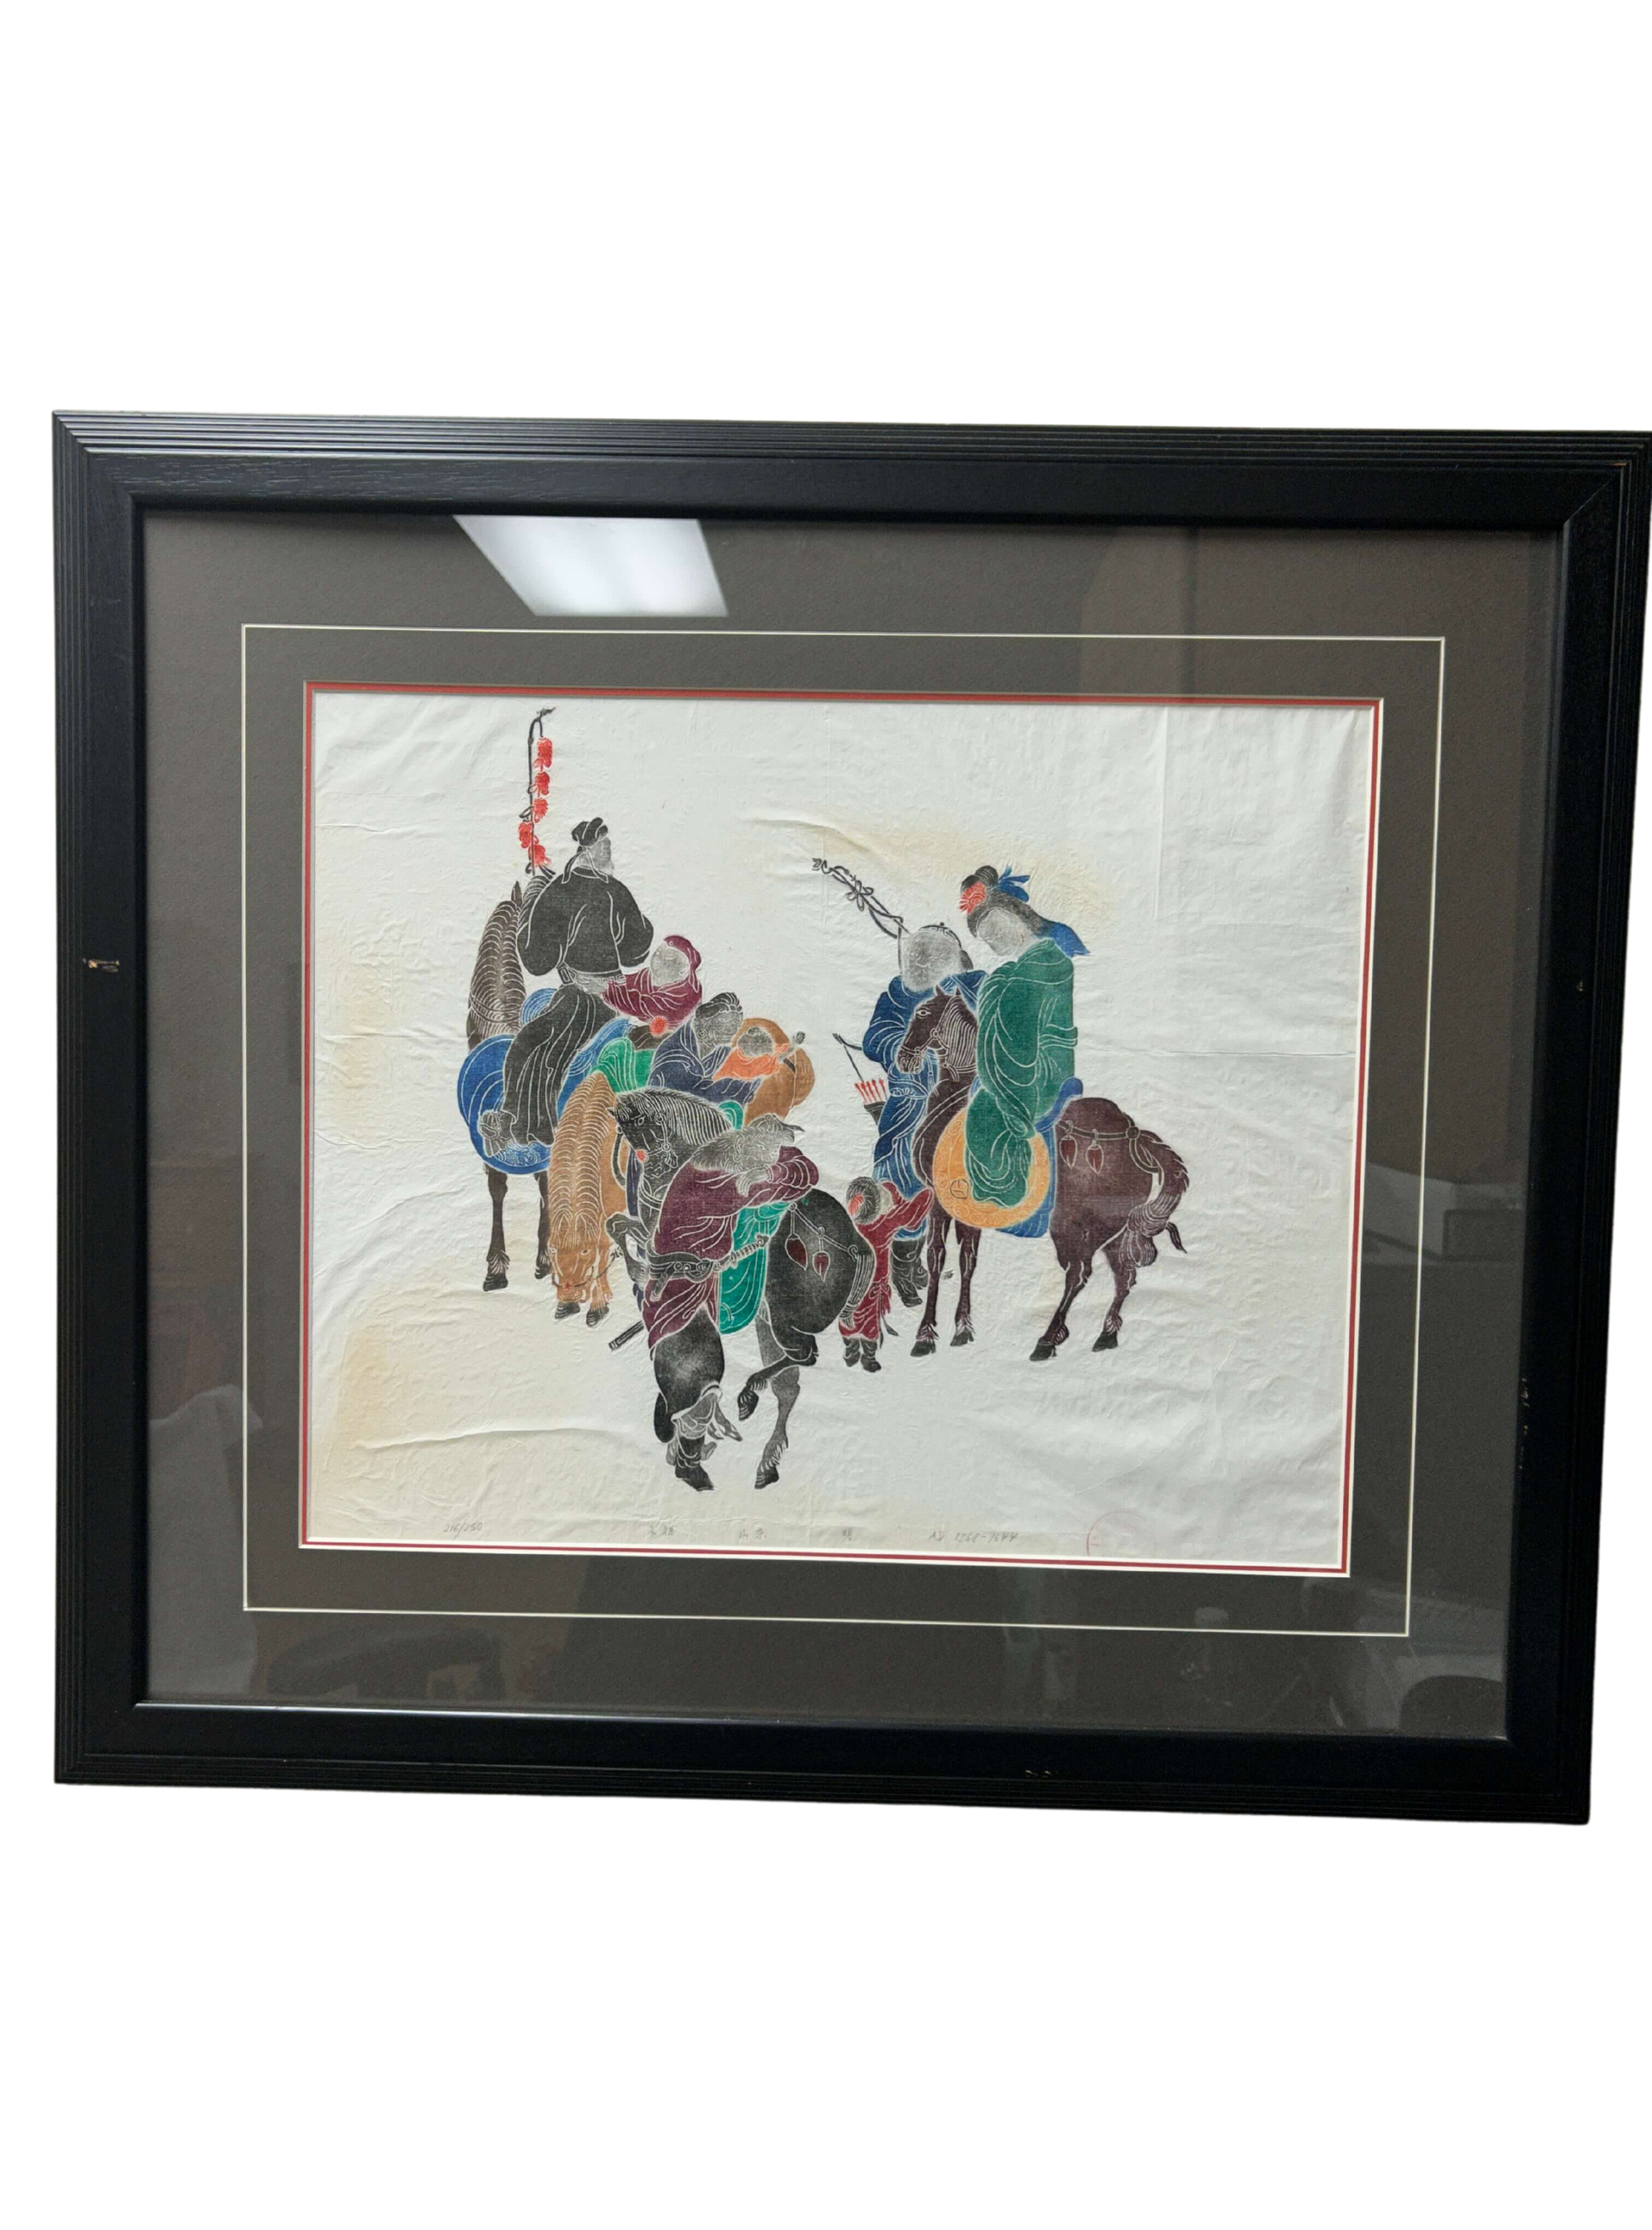 High-quality wooden picture frame in a classic rectangular shape, showcasing an illustration of people on horses, enhancing living spaces and capturing the essence of visual arts. A timeless piece perfect for transforming rooms into captivating galleries, available to support Allard Audiology